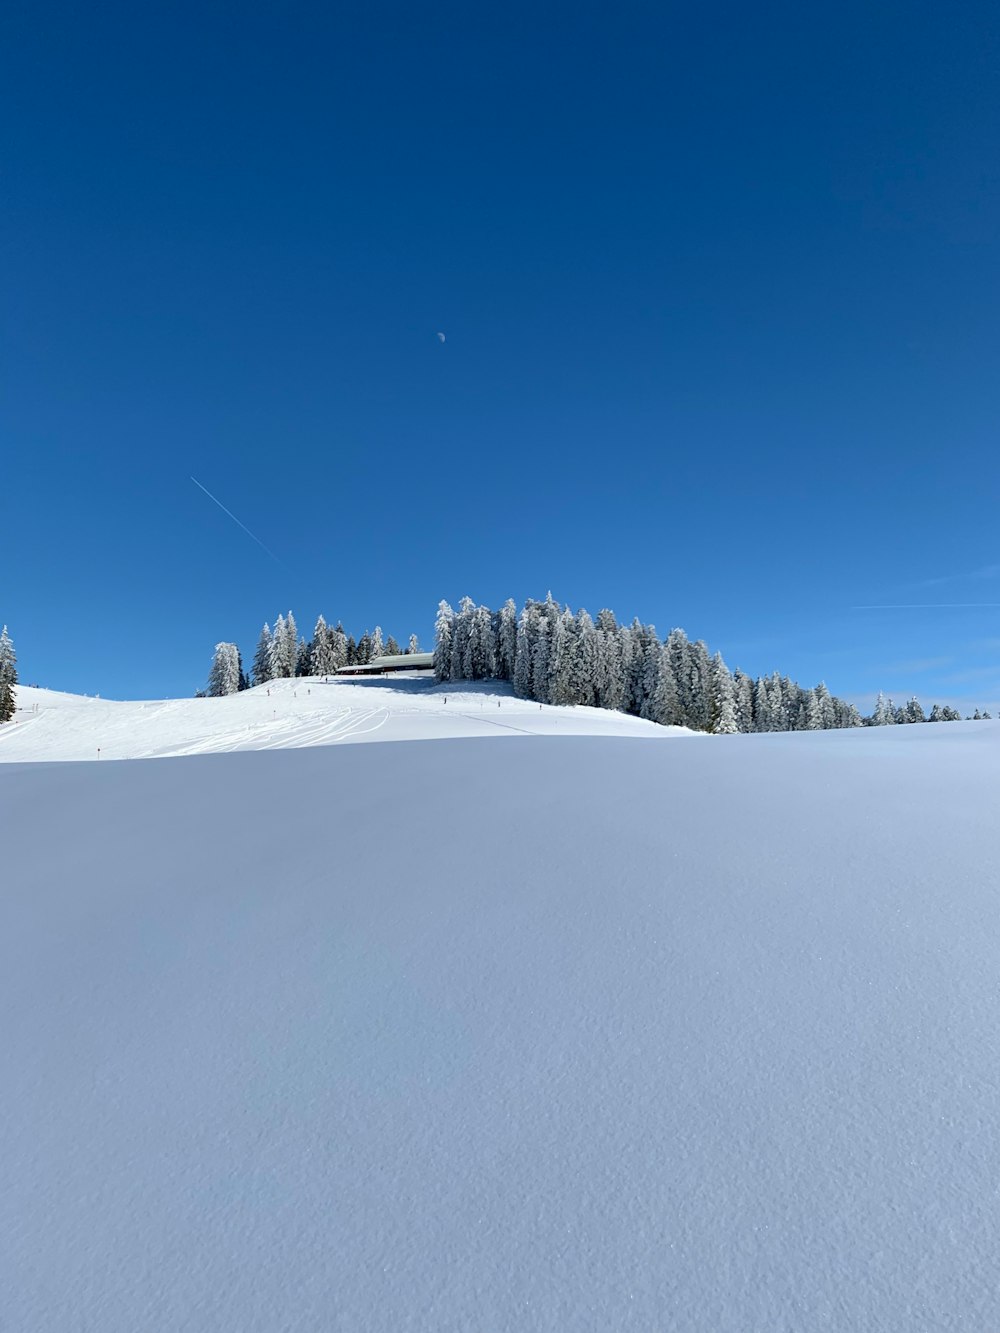 green trees on snow covered ground under blue sky during daytime